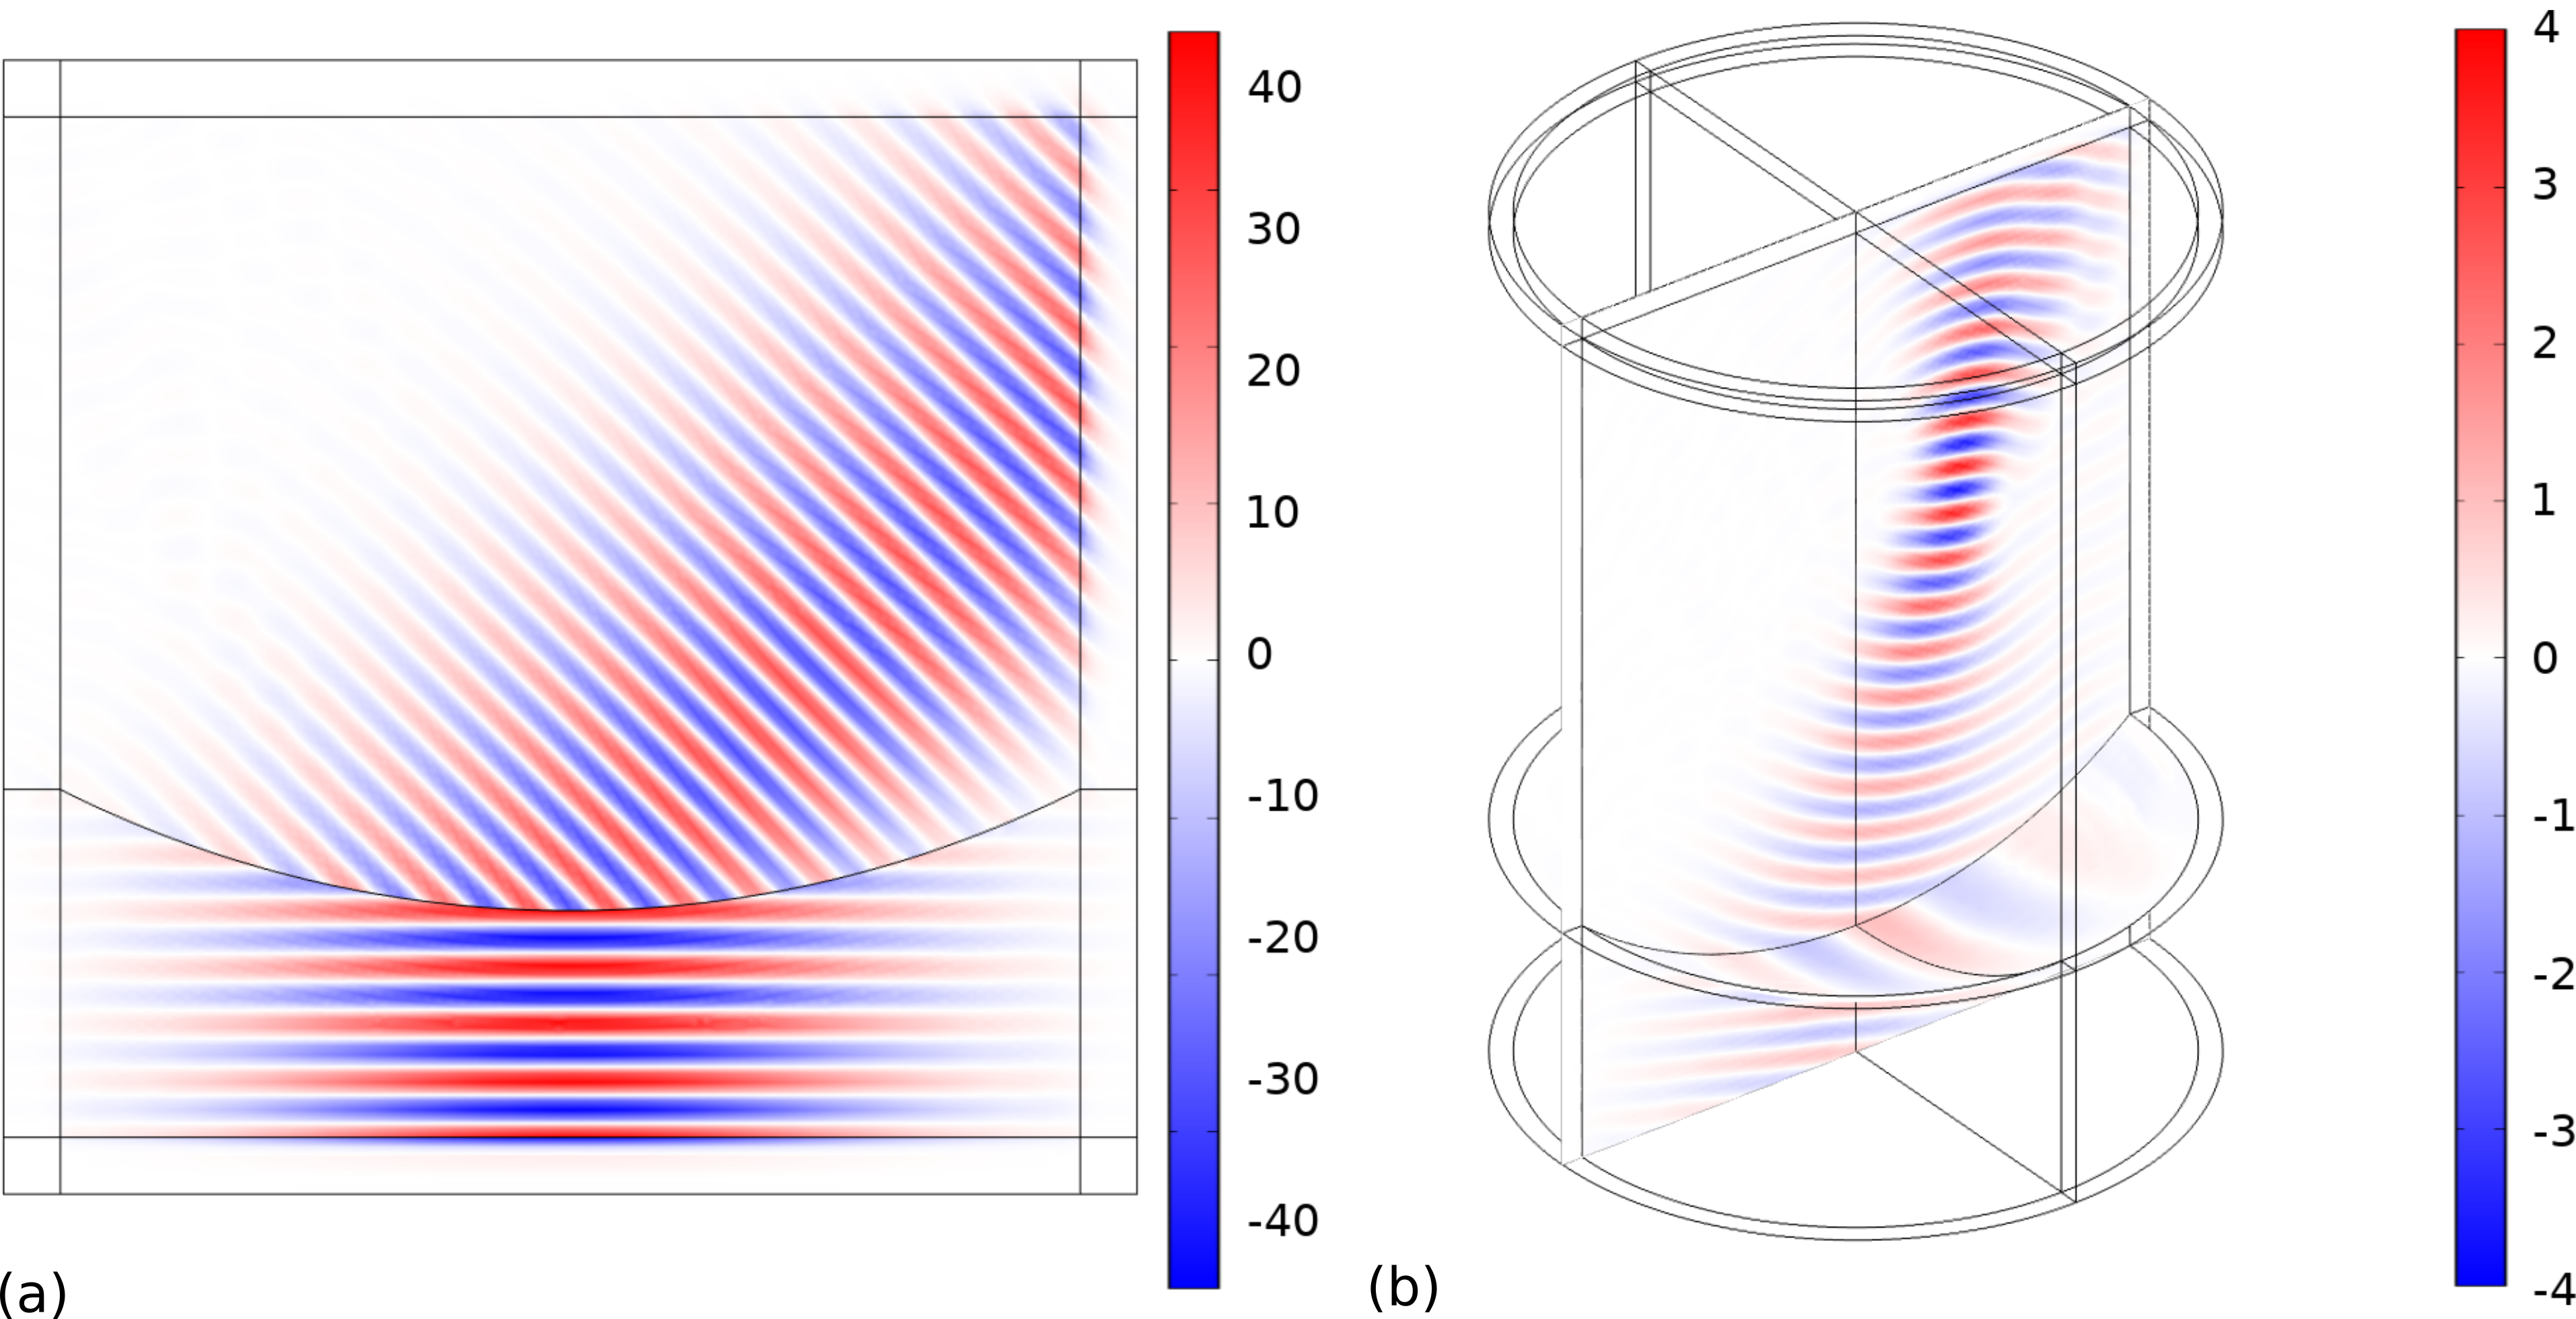 (a) 2D simulation of a diffraction conformal metasurface. (b)
3D simulation of a conformal metalens.